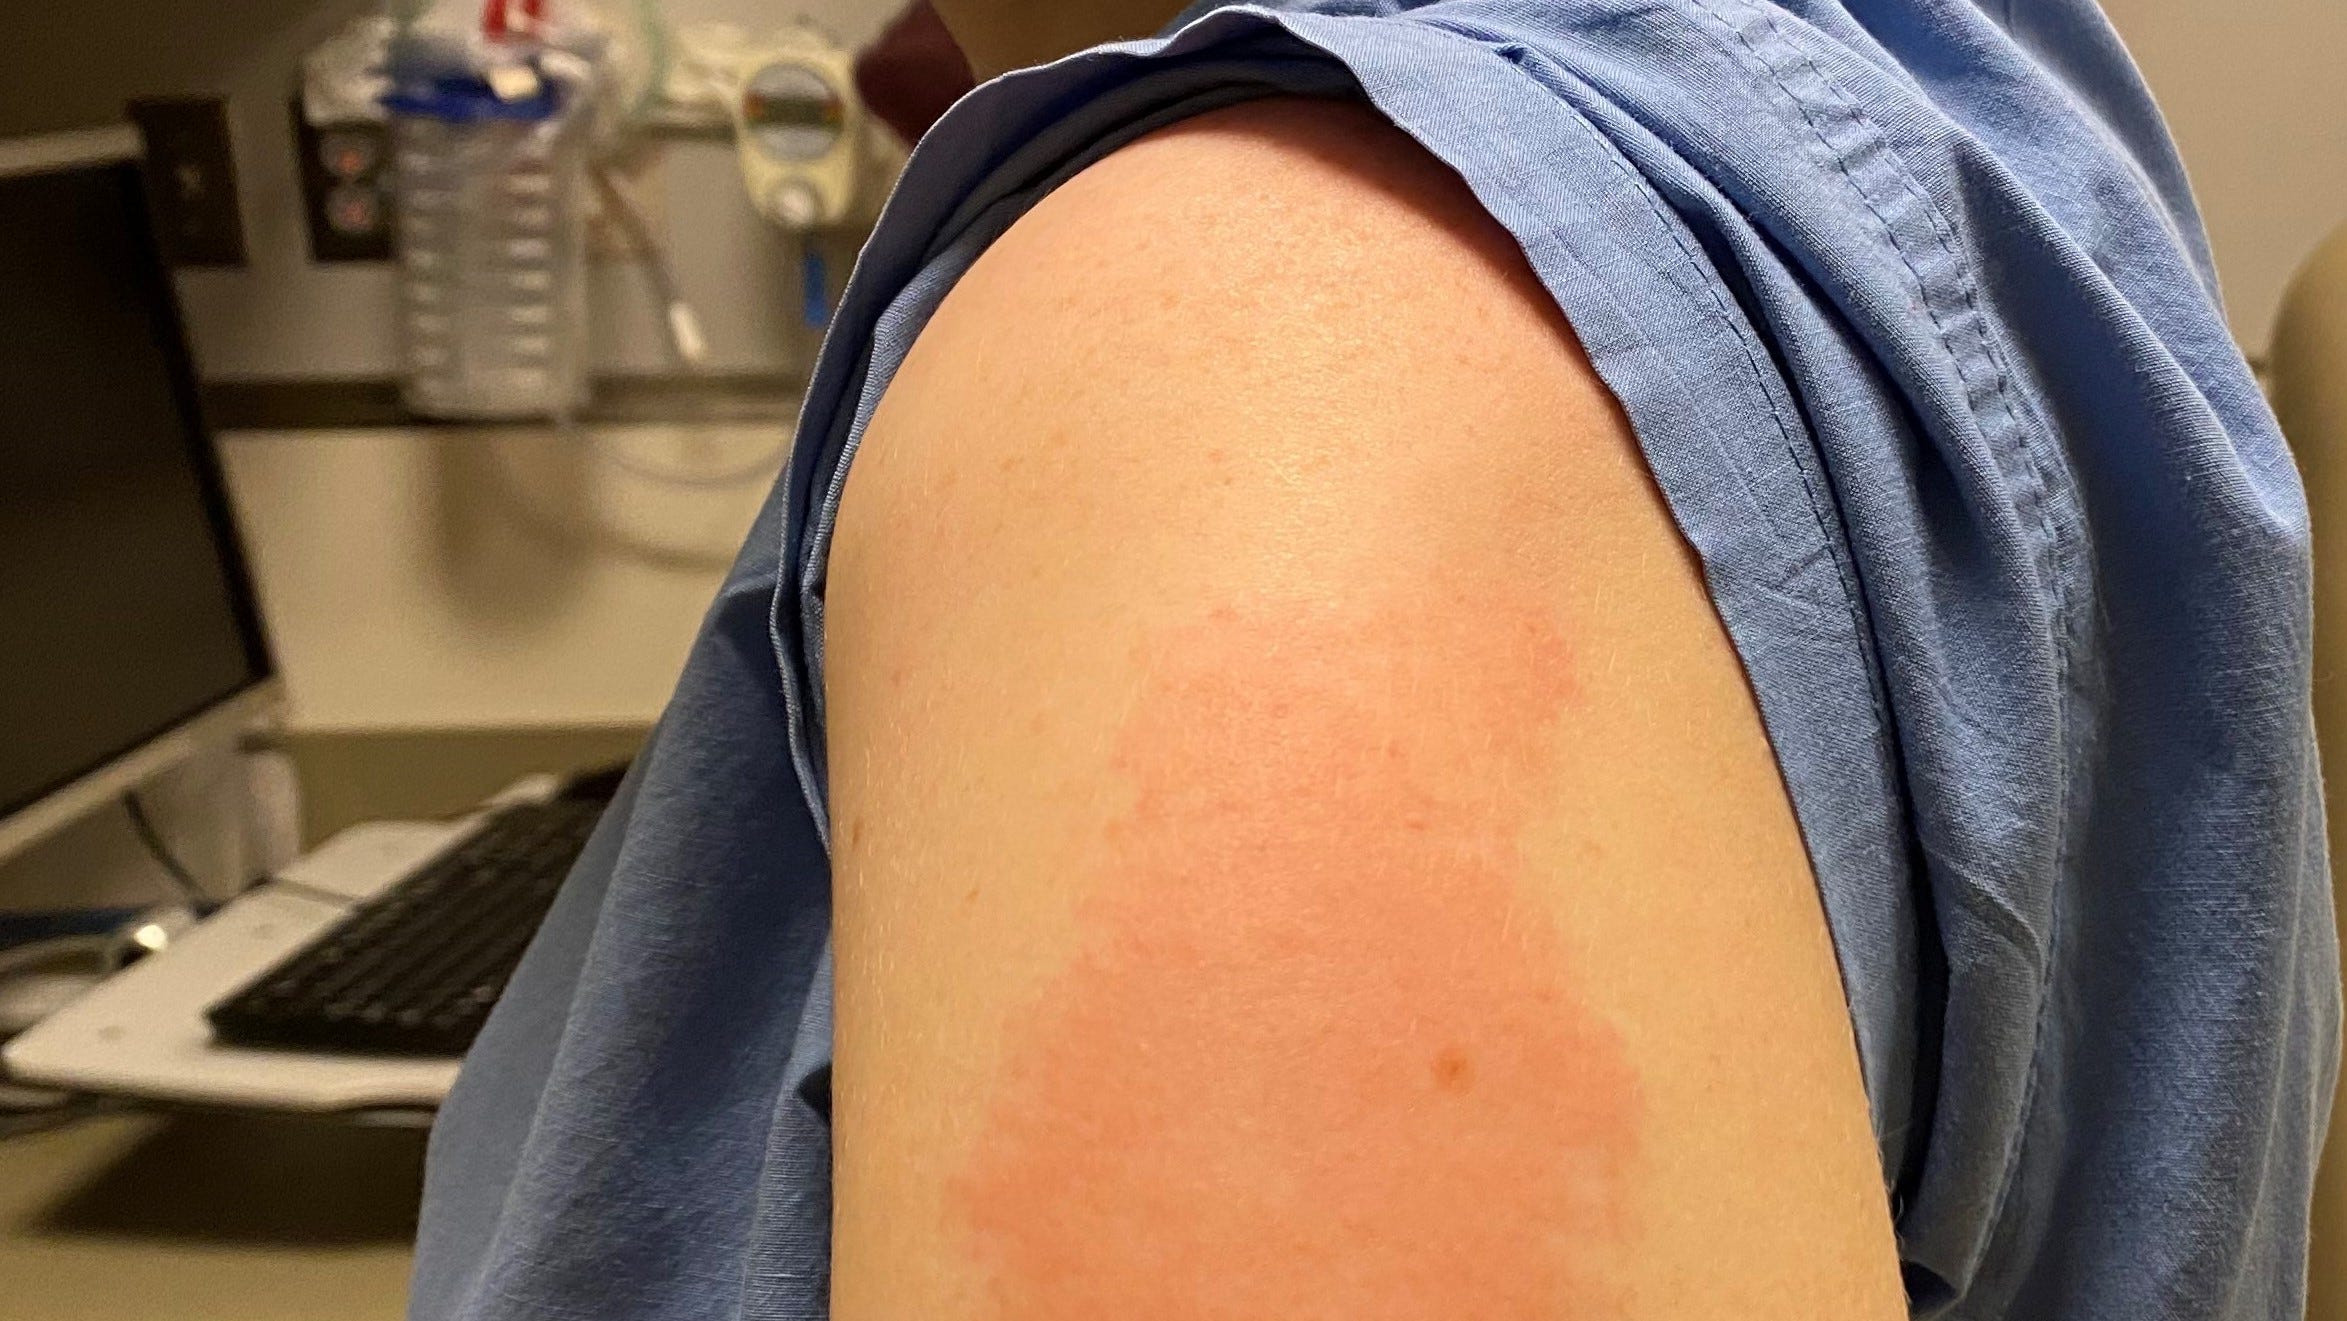 COVID vaccine side effects study: Rashes, skin reactions not dangerous